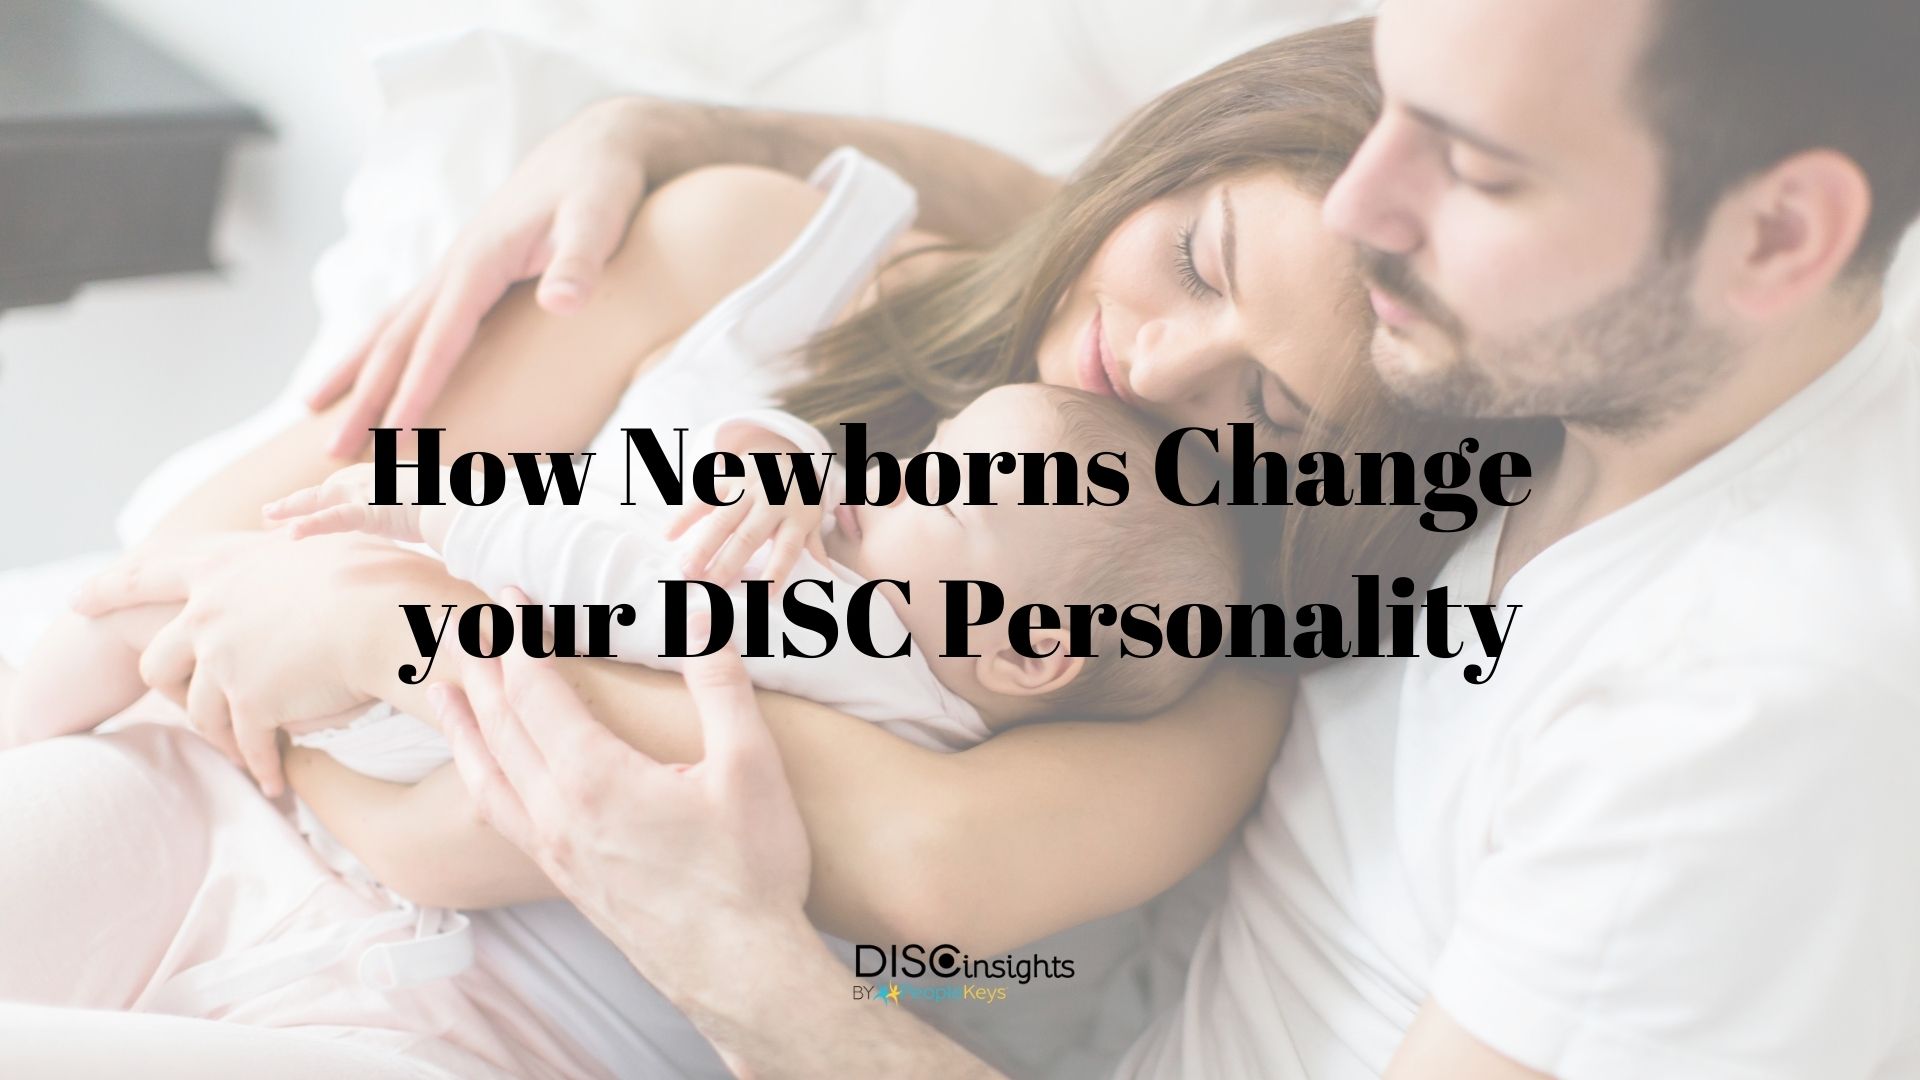 How Newborns Change your DISC Personality